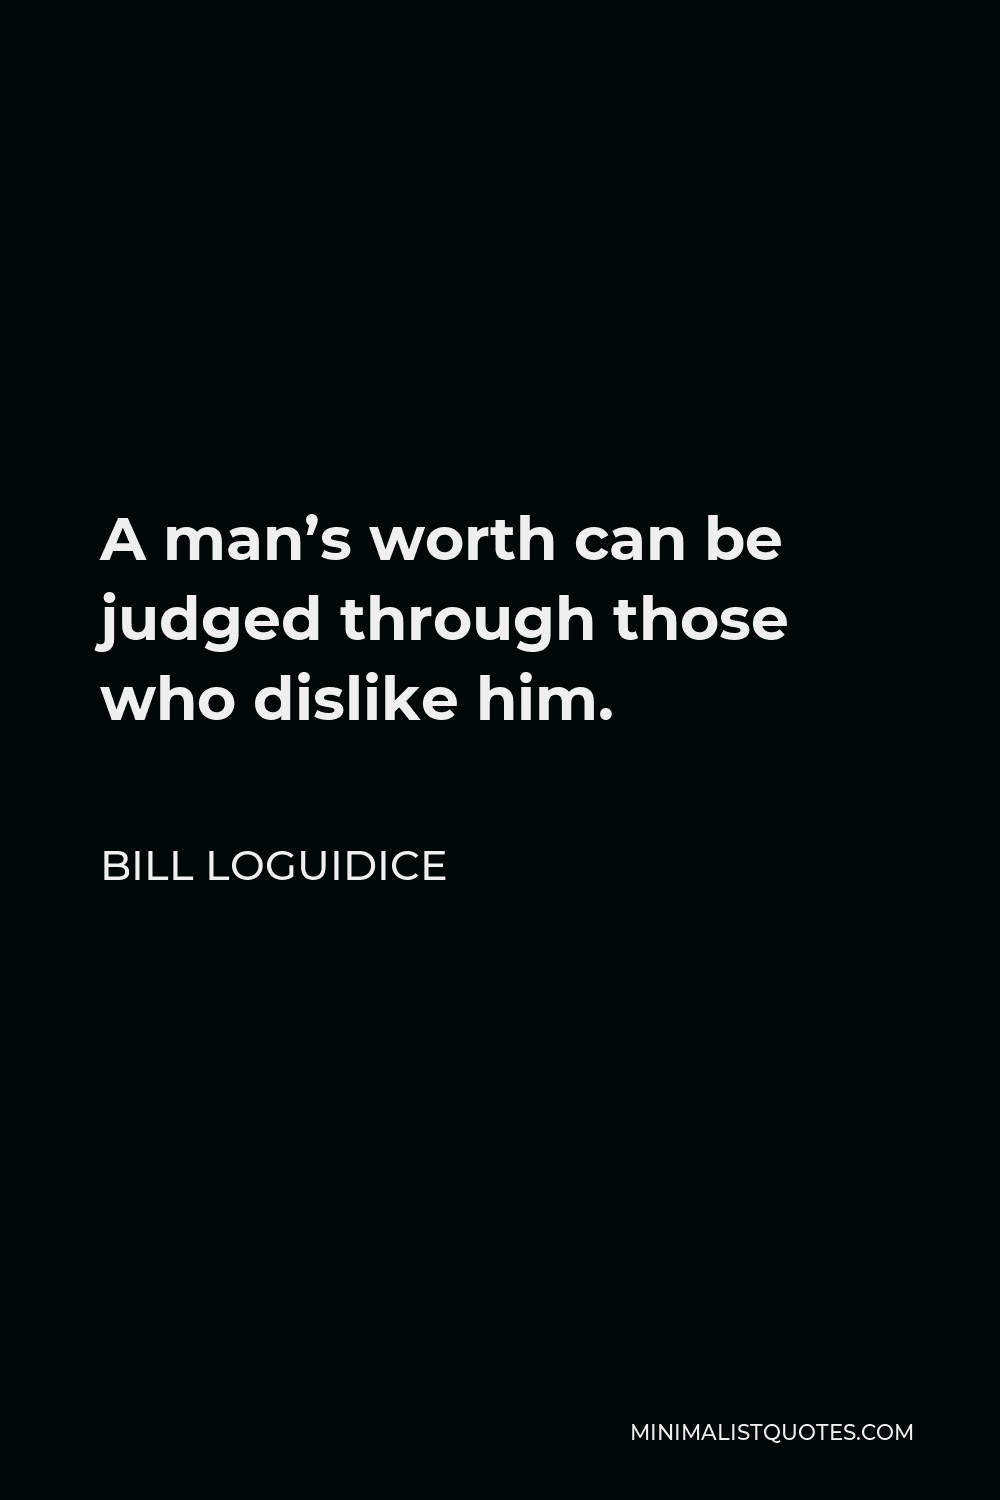 Bill Loguidice Quote - A man’s worth can be judged through those who dislike him.